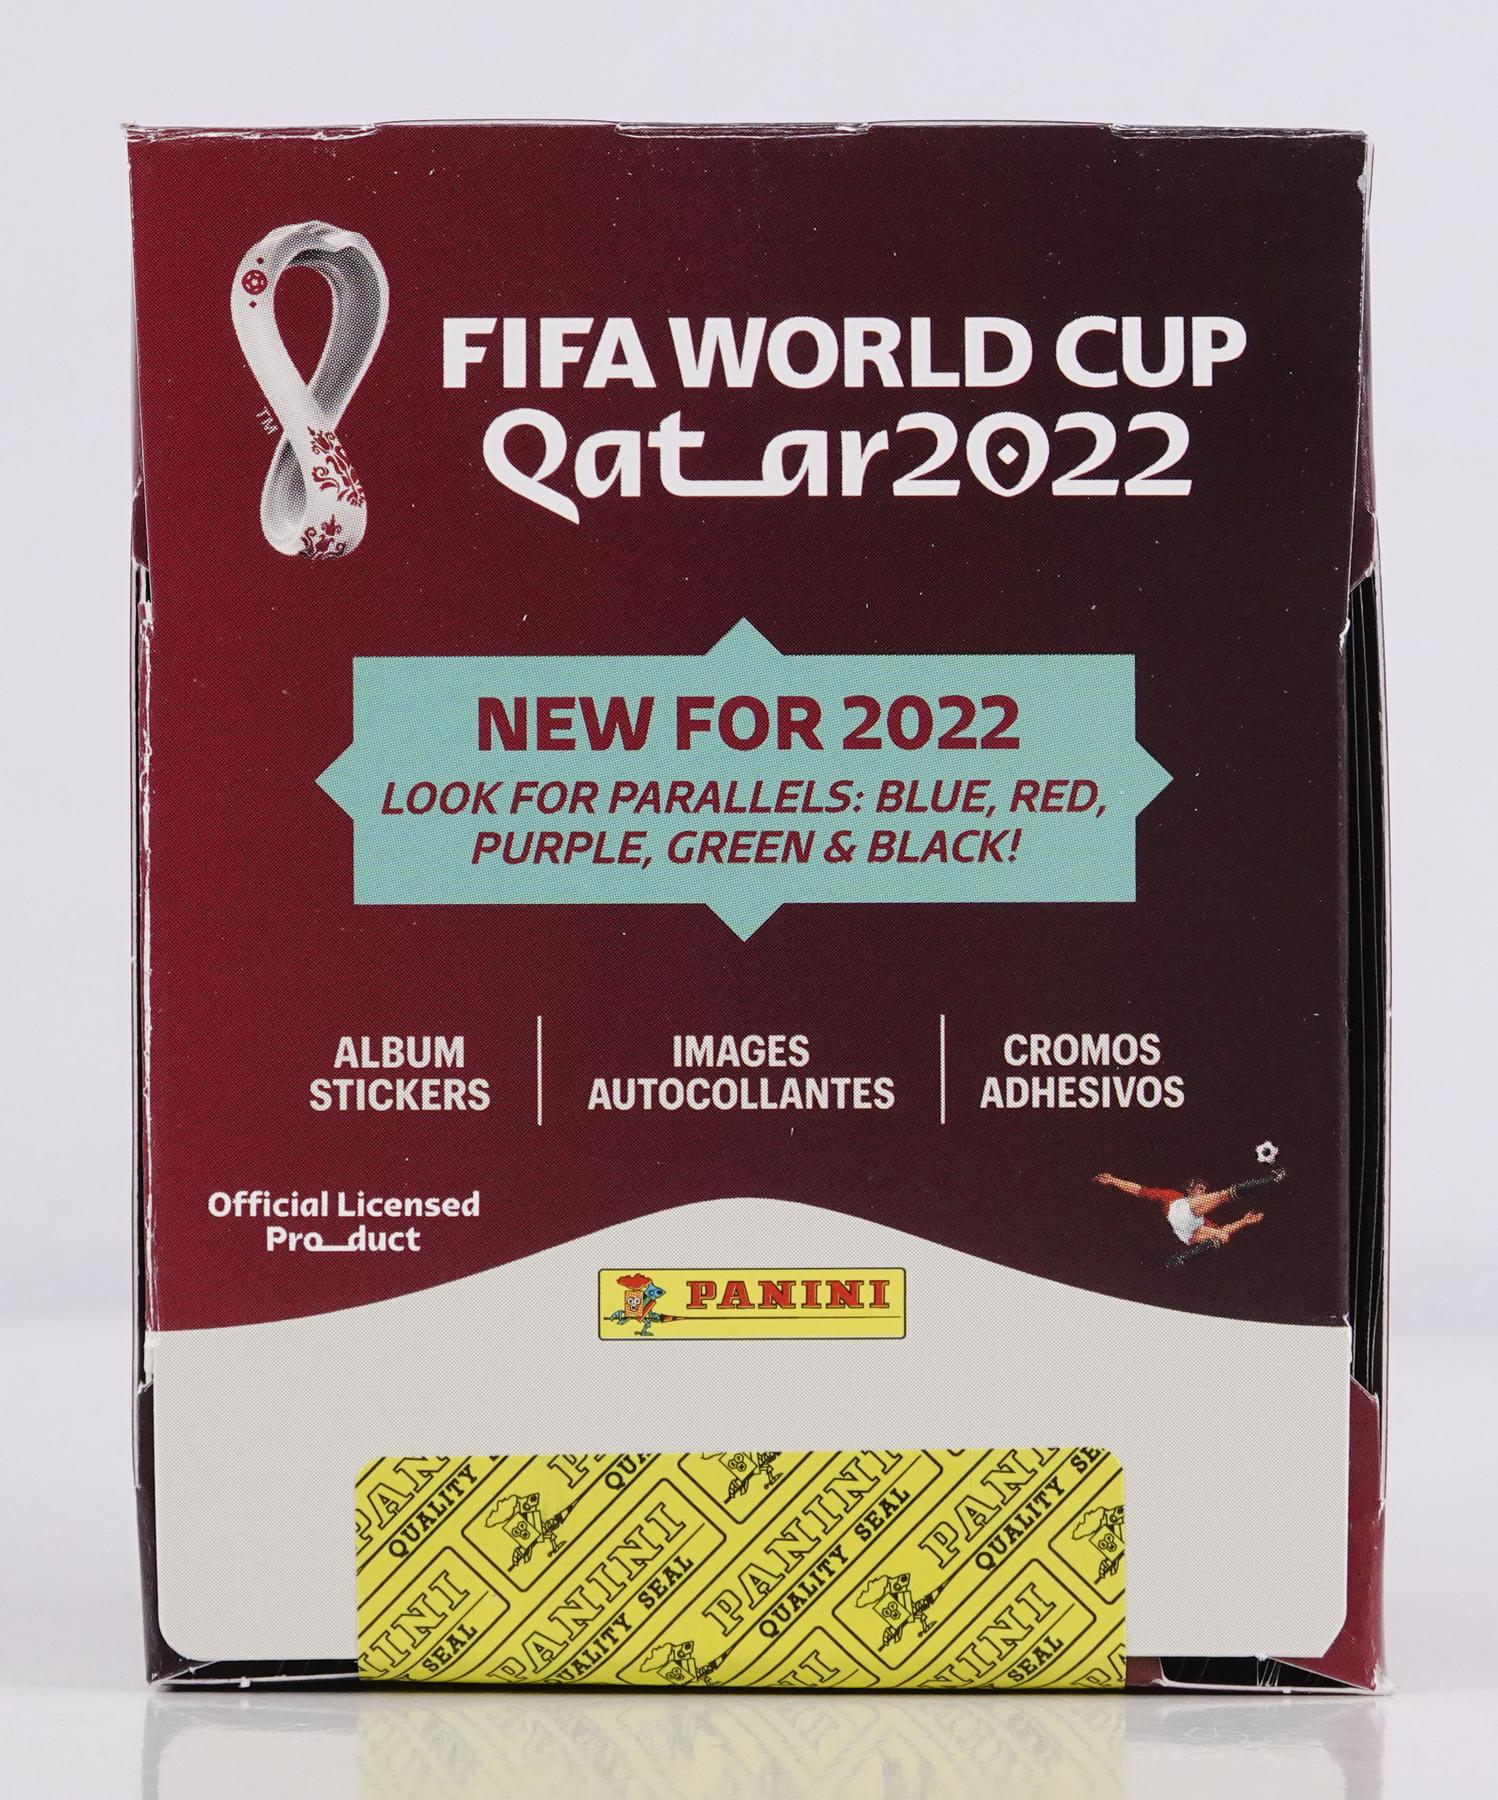 PANINI Qatar World Cup Foot Ball Super Star Collection Cards